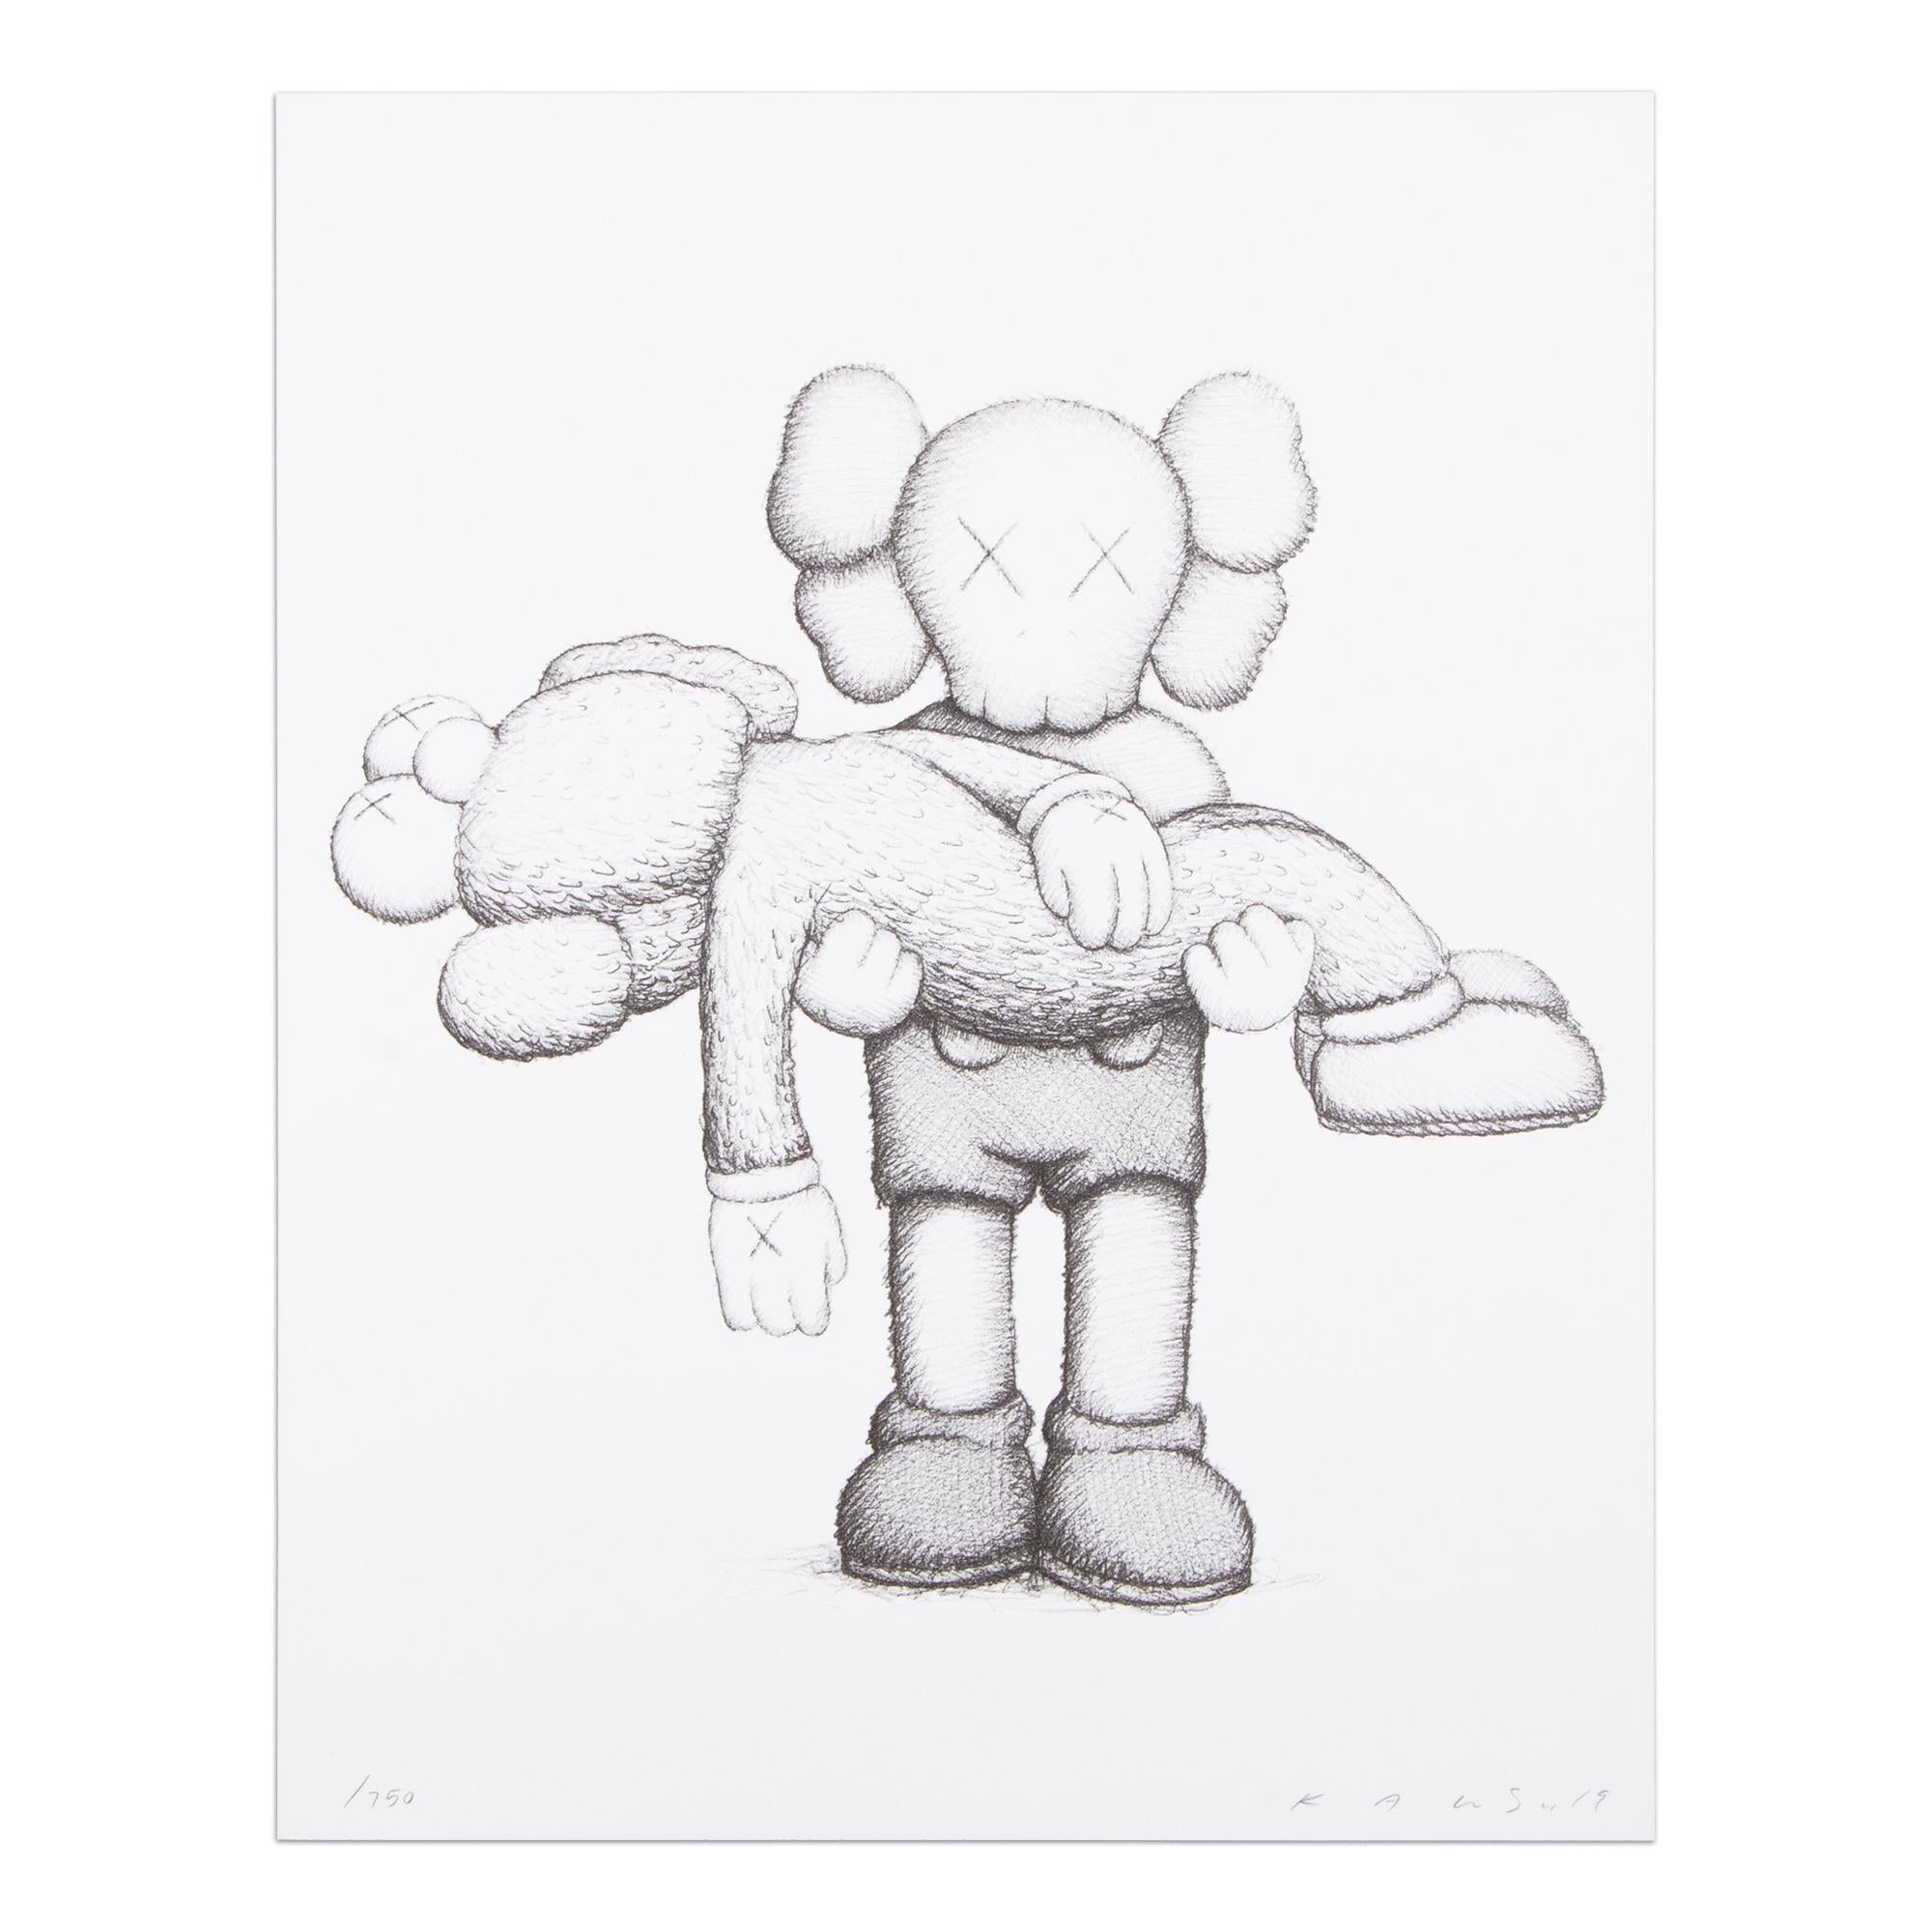 KAWS (American, b. 1974)
Gone, 2019
Medium: Screenprint on Arches Aquarelle 300gsm (incl. limited edition catalogue for the exhibition of KAWS: Companionship in the Ages of Loneliness)
Dimensions: 38.1 × 30.5 cm (15 × 12 in)
Edition of 750: